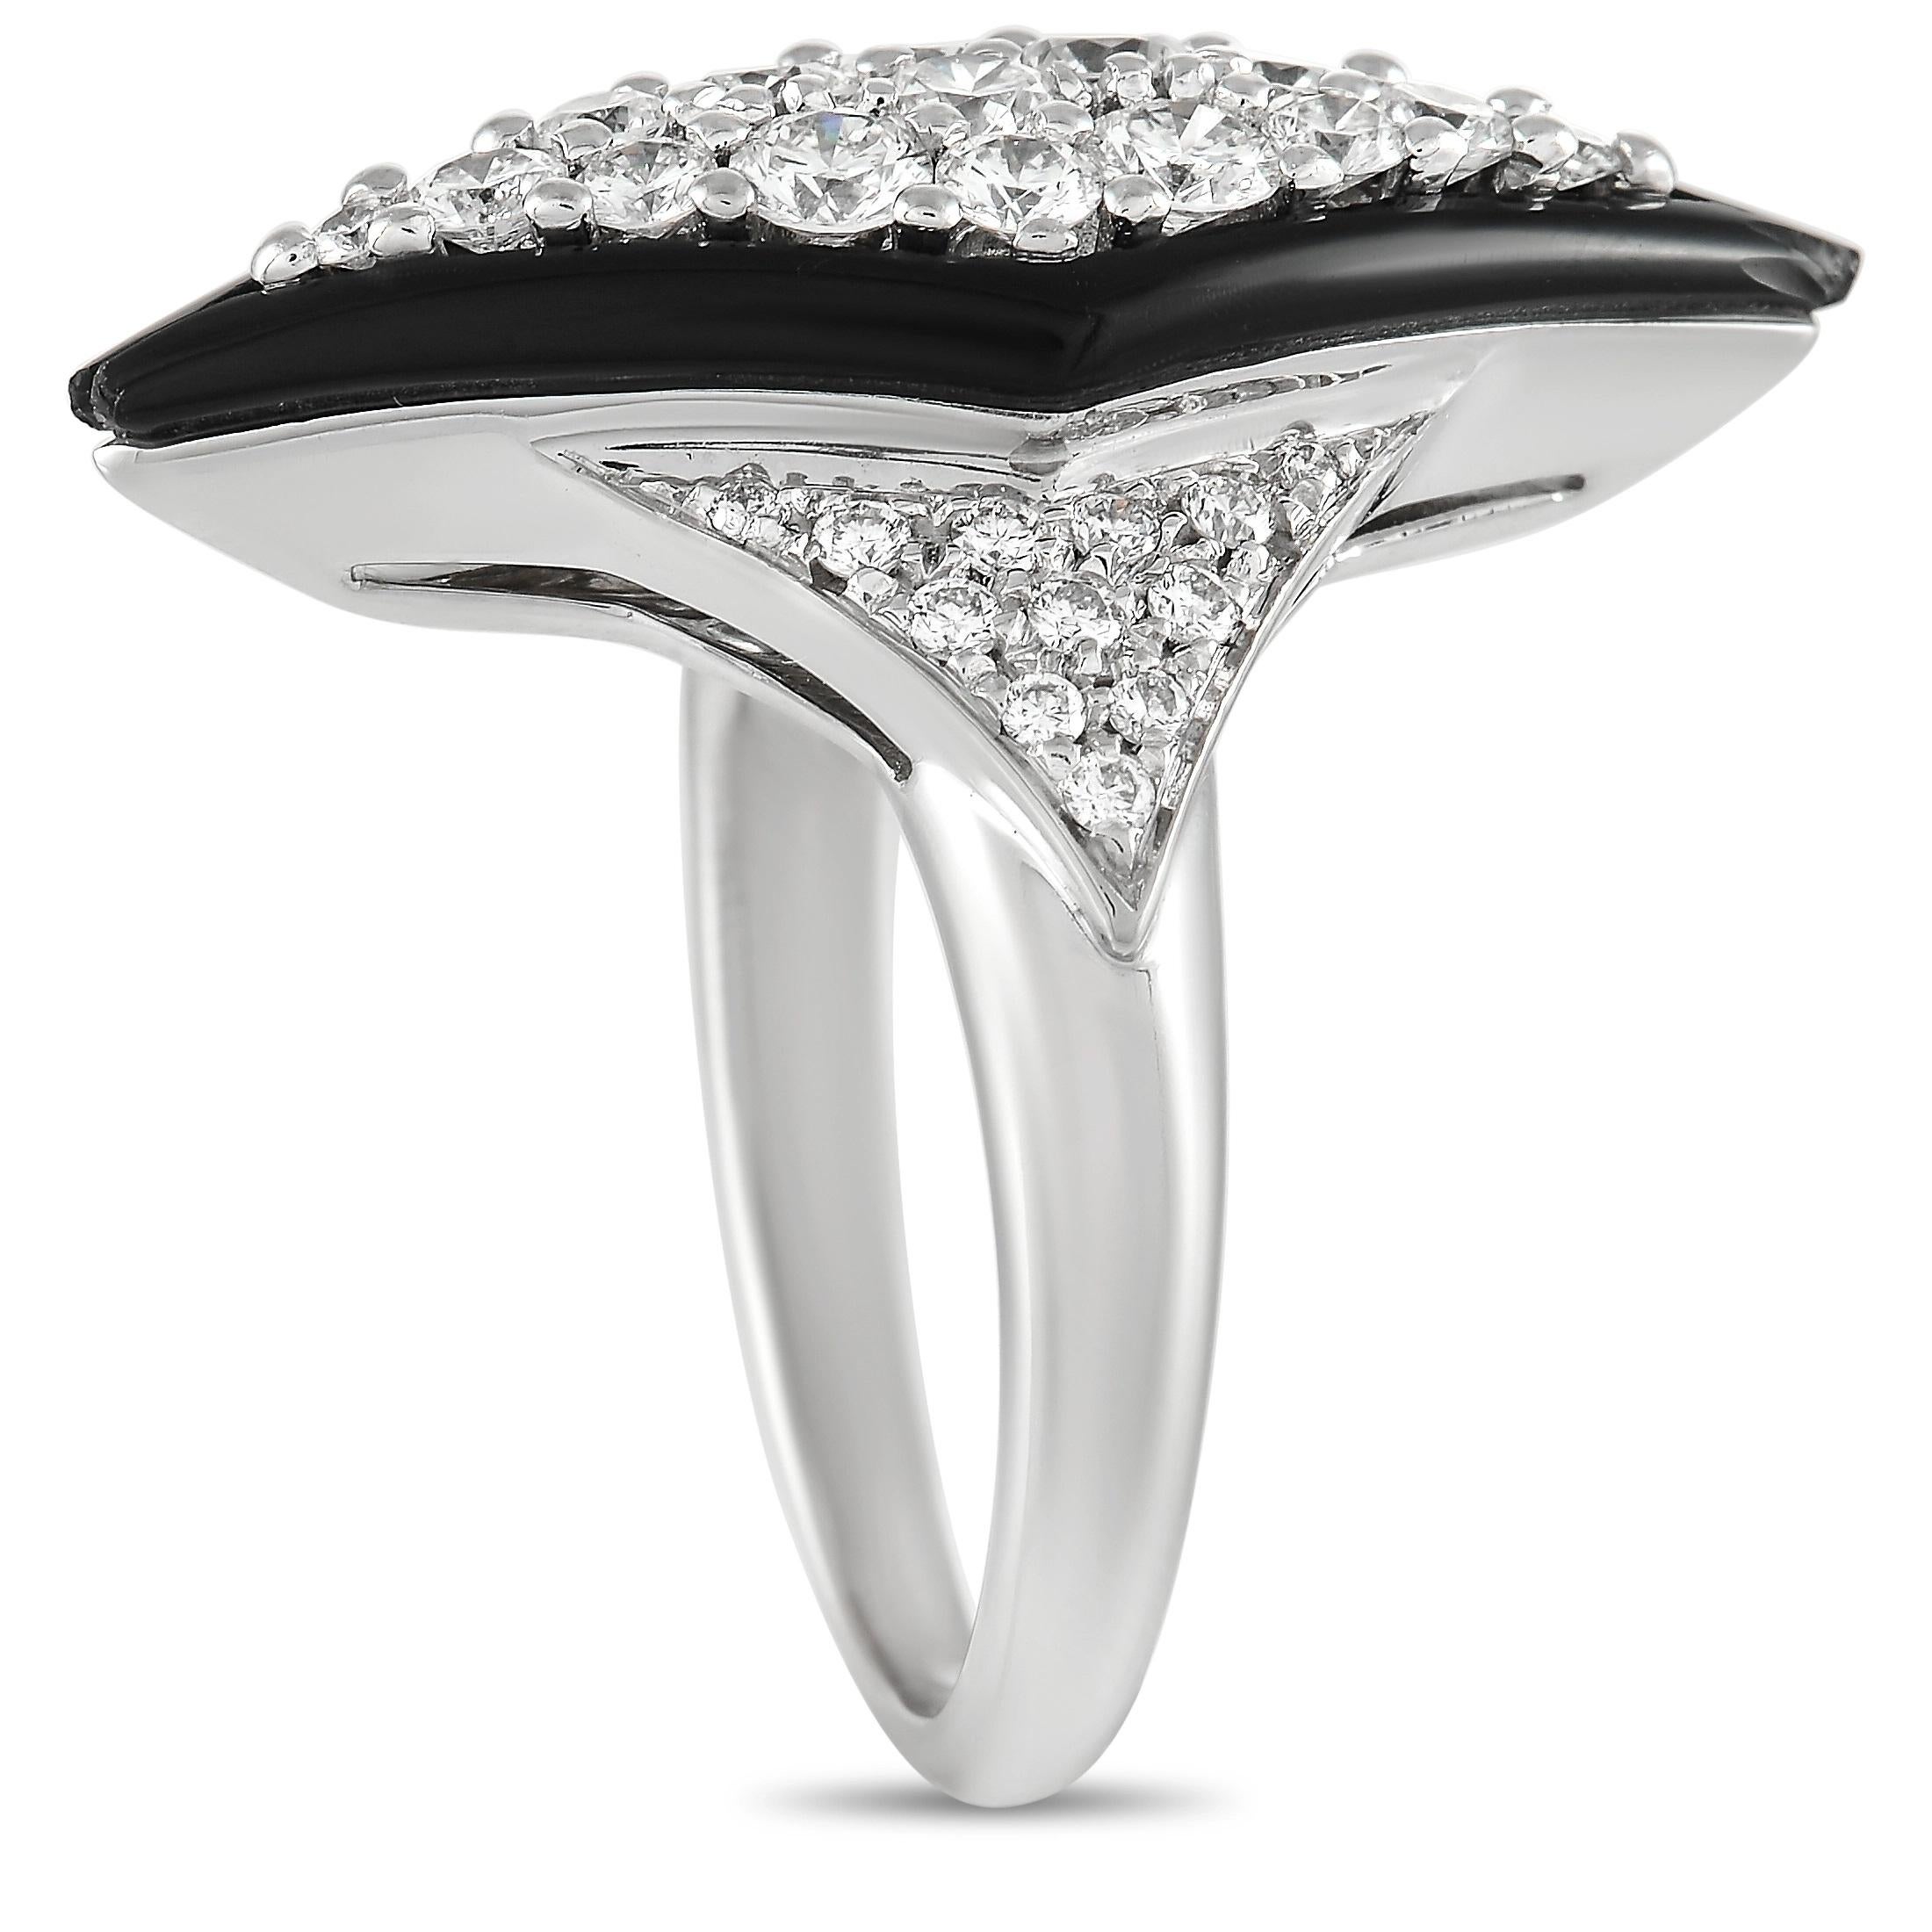 This unique Picchiotti 18K White Gold 1.07 ct Diamond Onyx Ring is sure to attract attention. The thick rounded band is made with sleek 18K White Gold and set with 1.07 carats of round-cut diamonds of assorted sizes over the band and the face of the